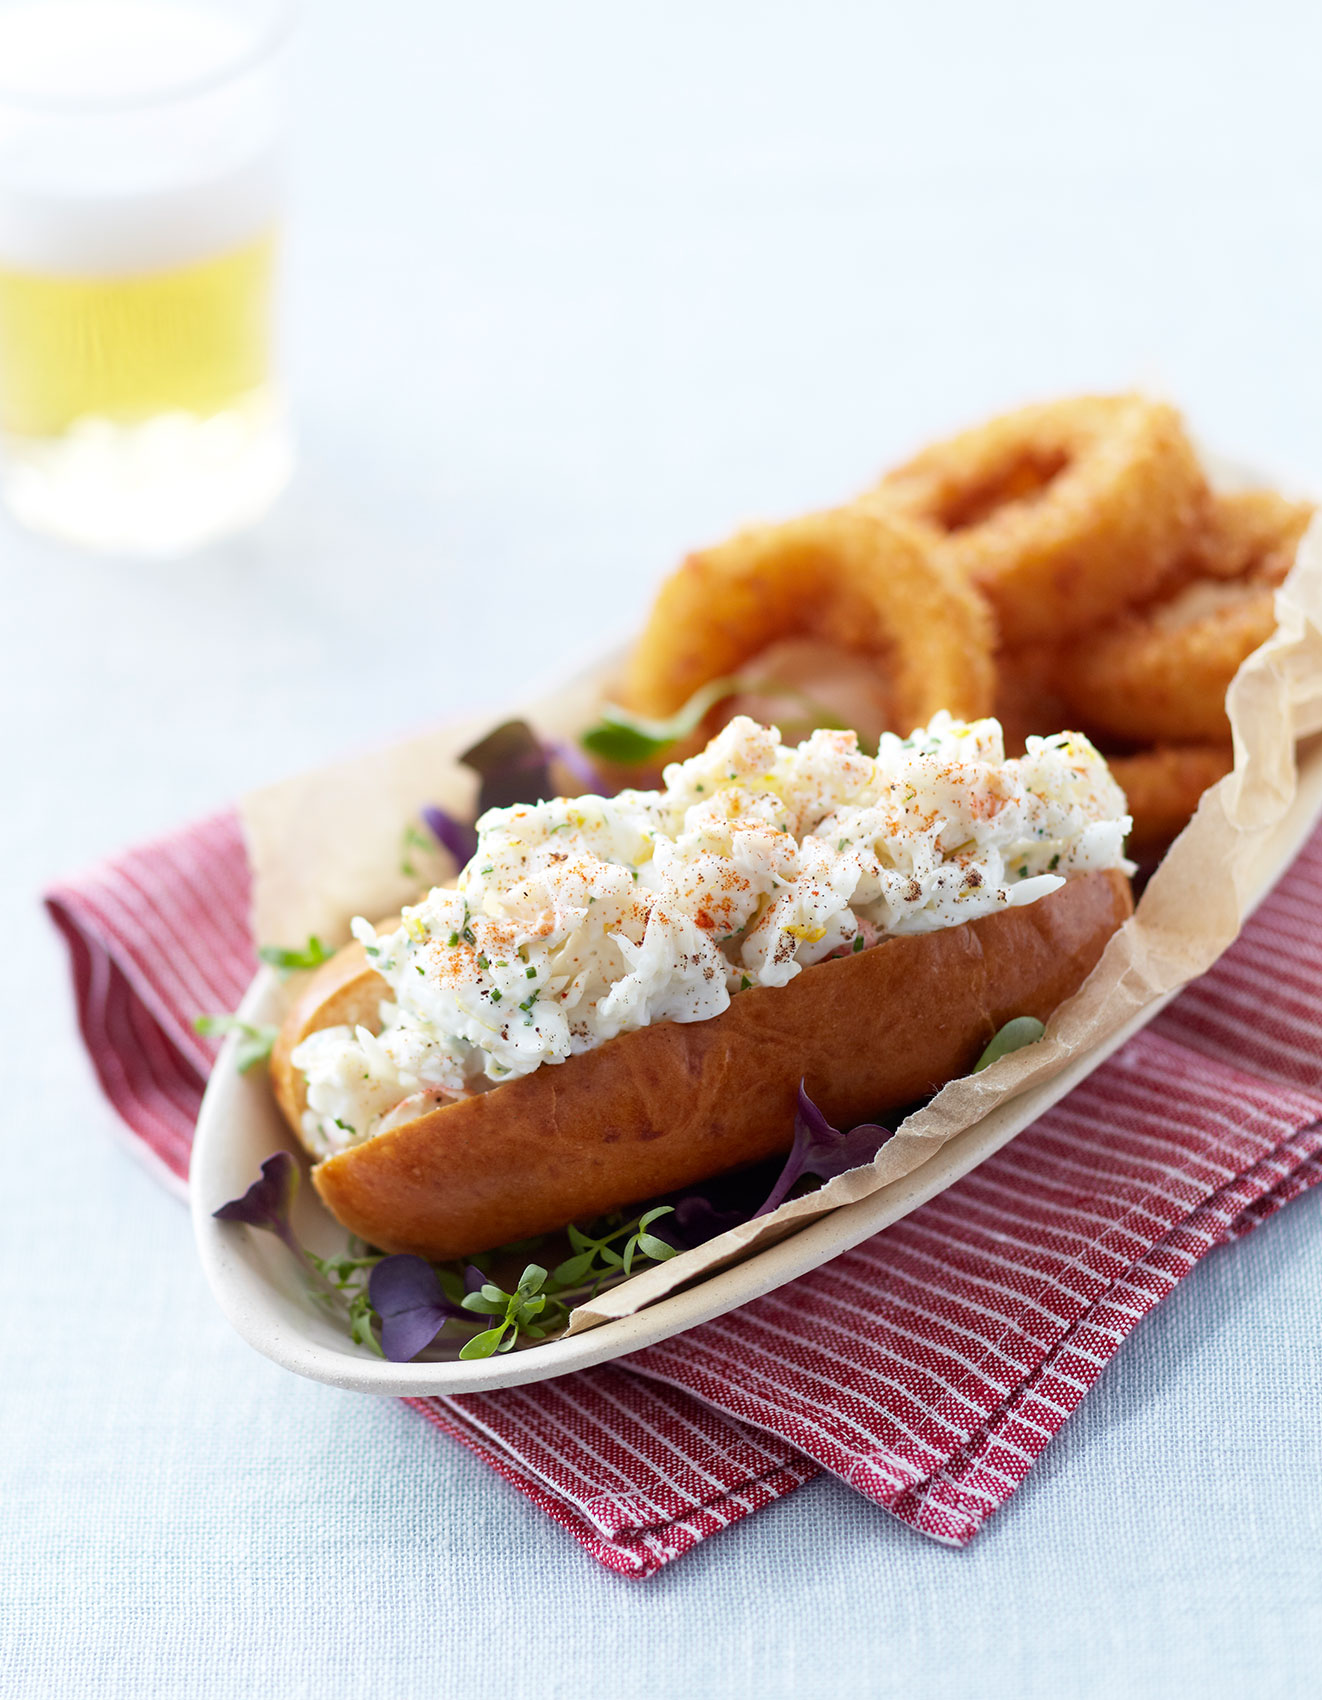 Vanilla Table • Natasha MacAller Lobster Roll with Fried Onion Rings • Cookbook & EditorialVanilla Table • Dancing Chef Smoked Trout with Sprouts & Red Onions • Cookbook & Editorial Food Photography